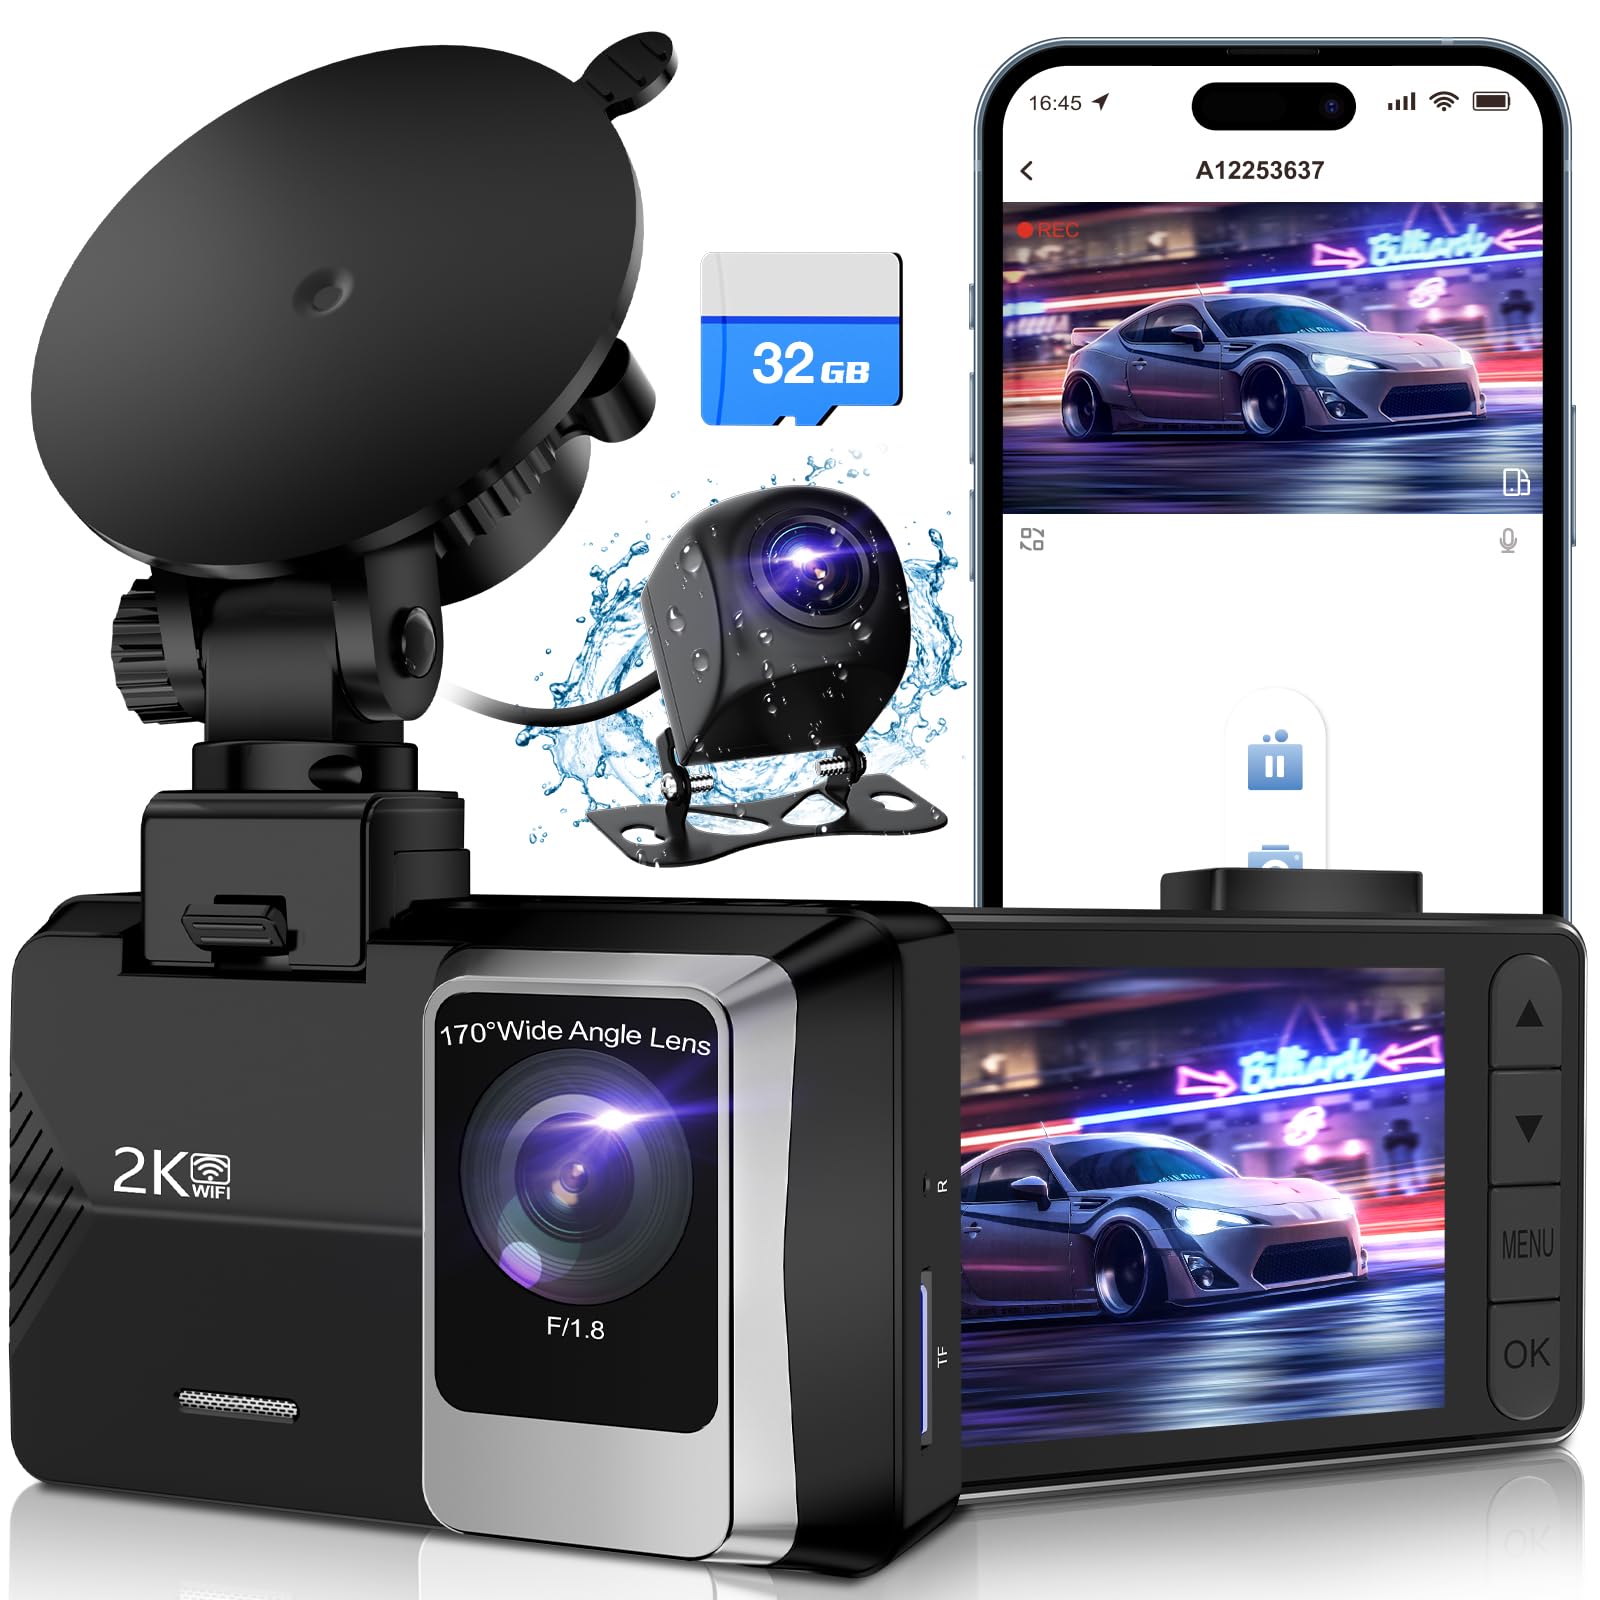 1 SUVCON Dash Cam Front and Rear, 2K Dash Camera for Cars